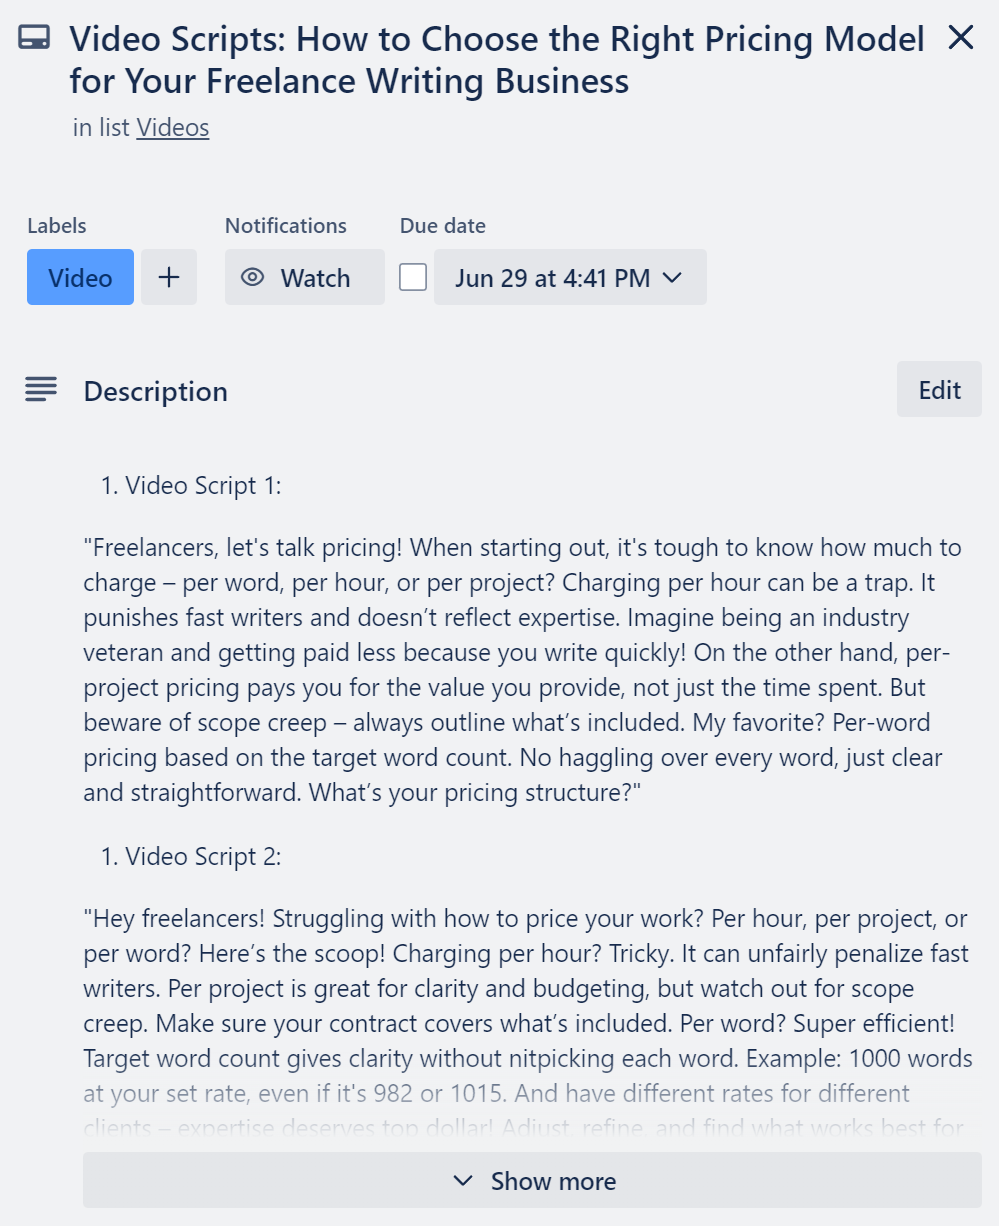 A trello card with video script copy added to the Description field, which was written by ChatGPT.